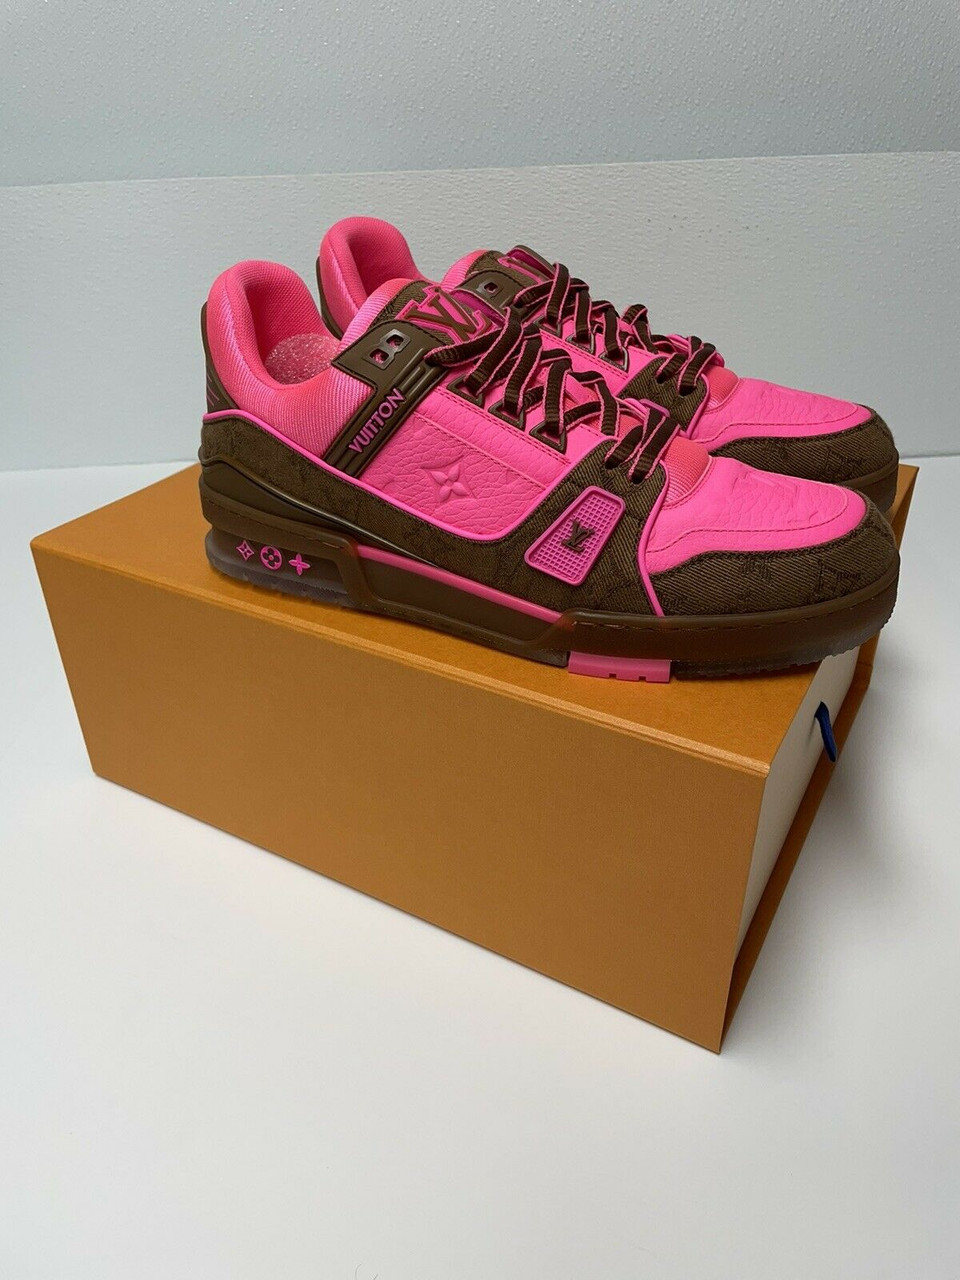 Louis Vuitton Neon Pink & Brown 'LV Trainer' Sneakers